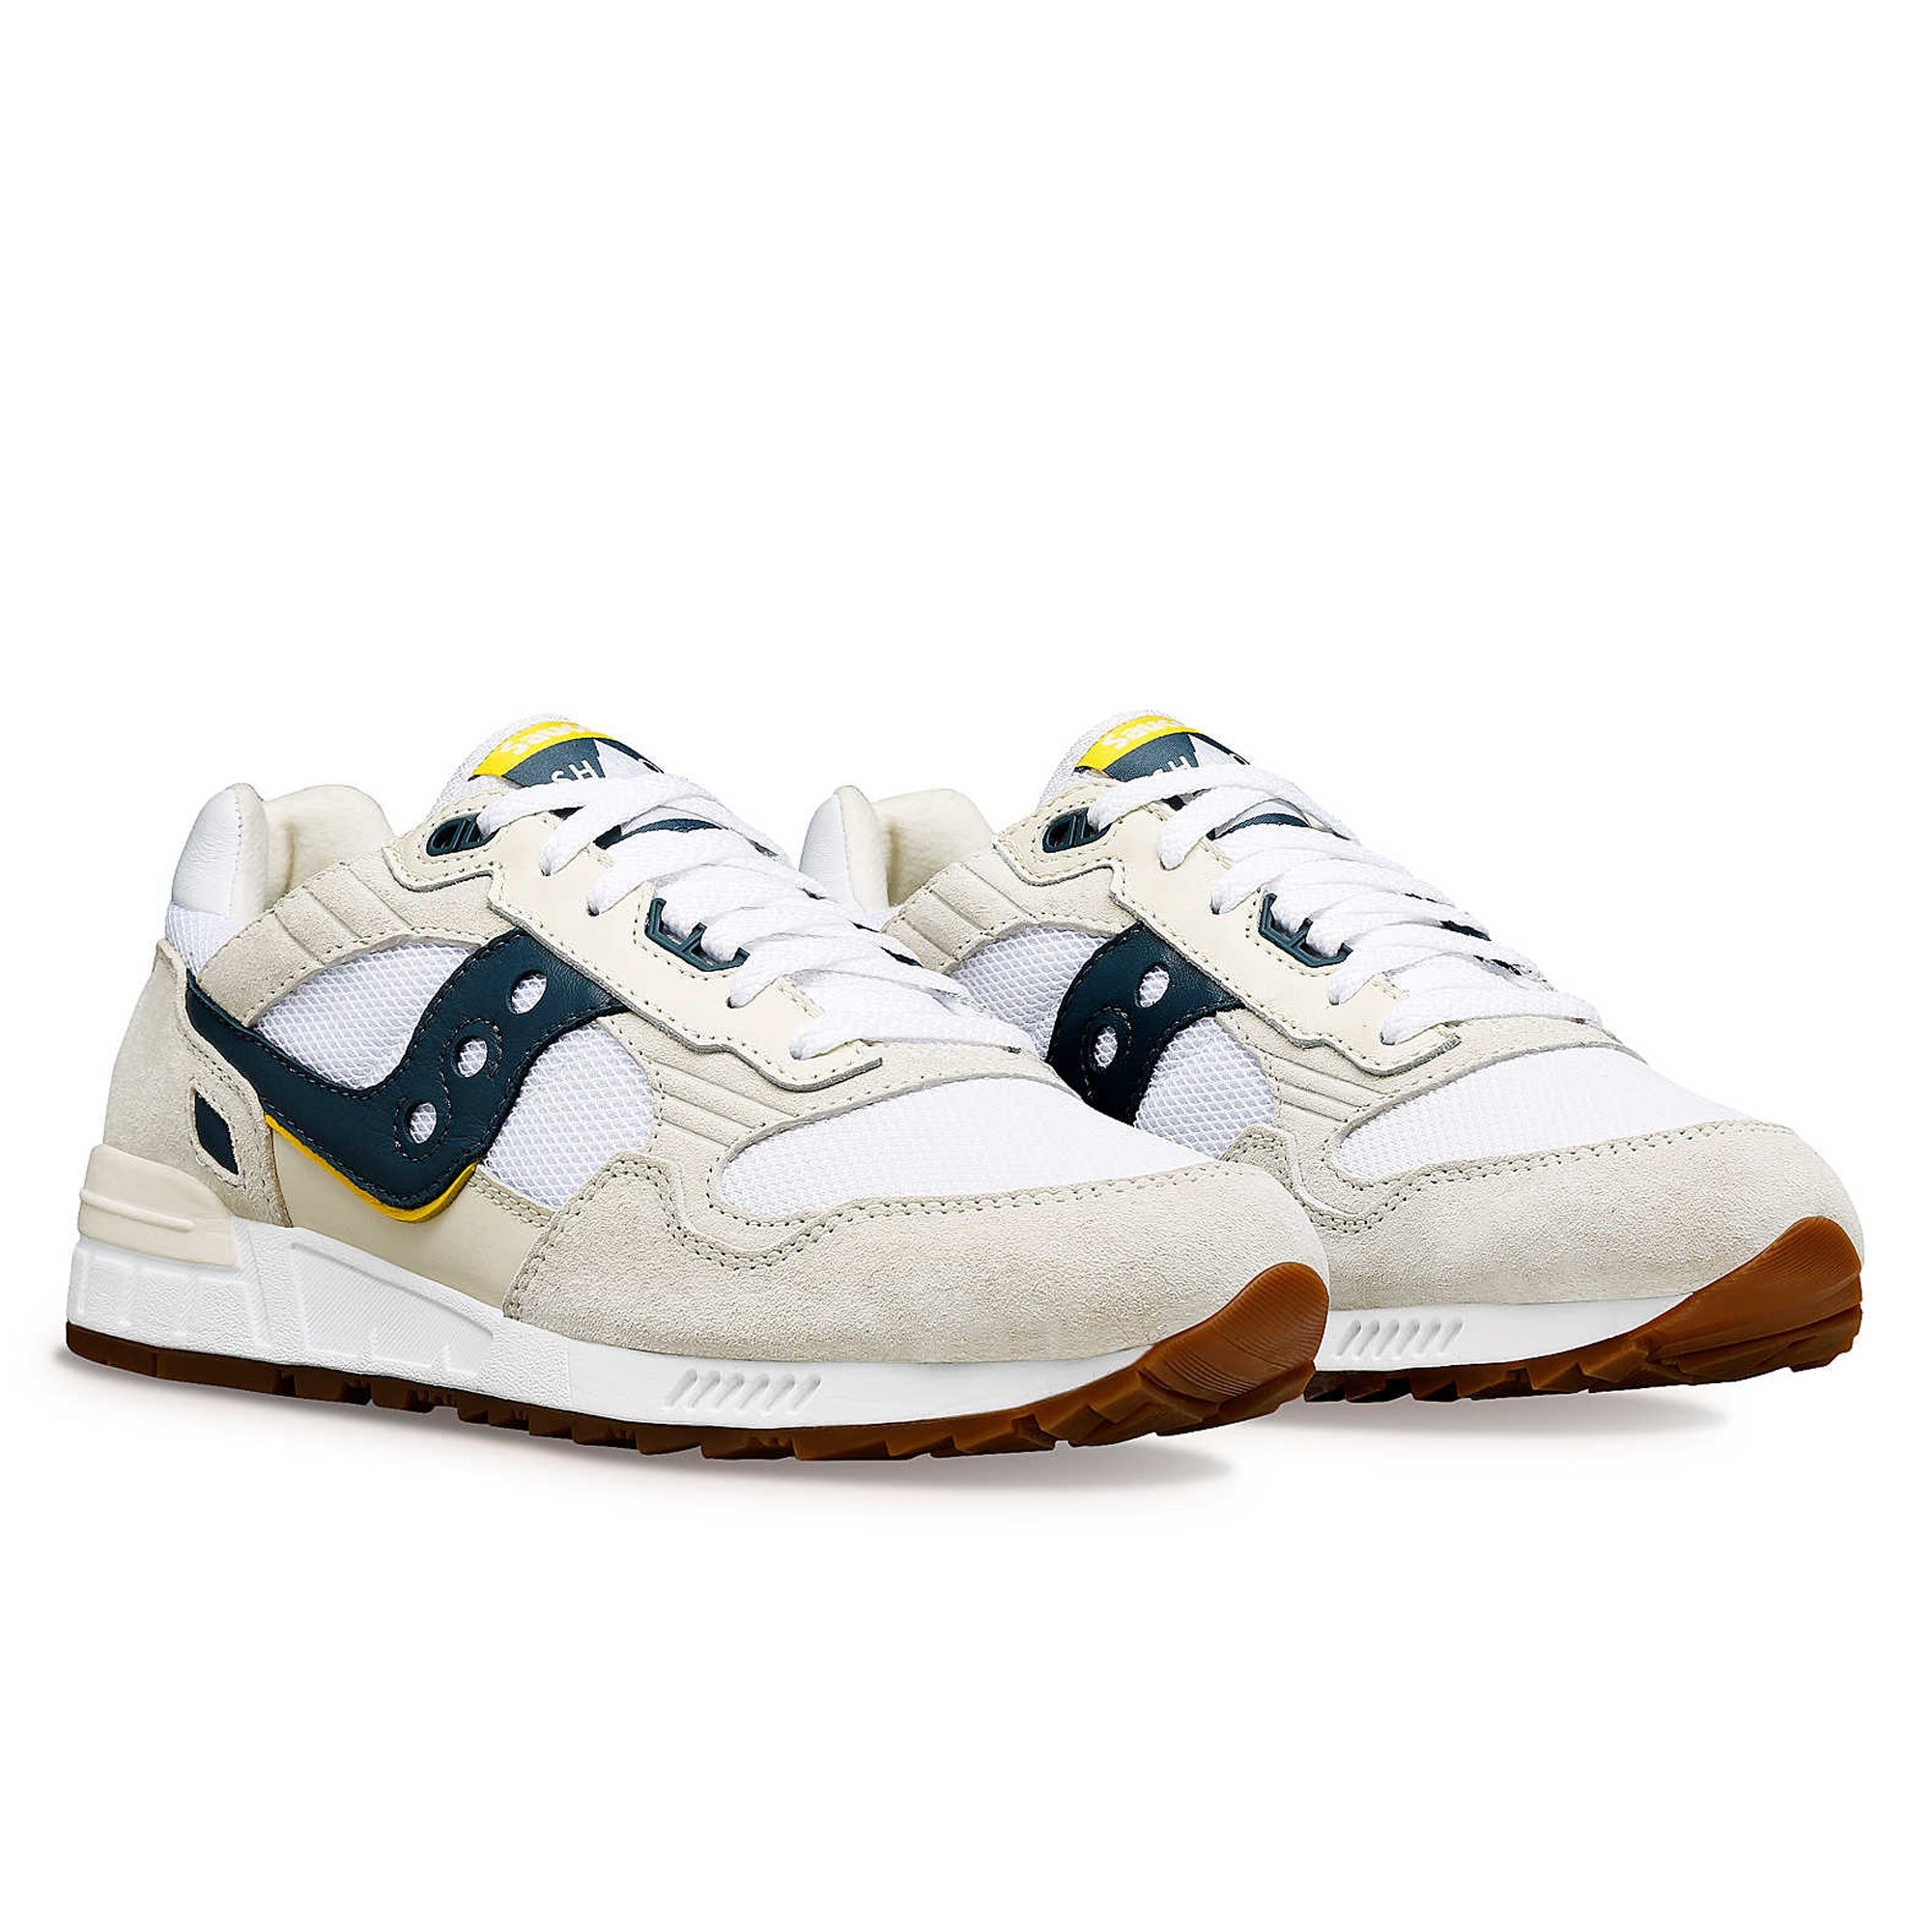 Saucony Shadow 5000 Premium "Ivy Prep Pack" Trainers - White/Navy